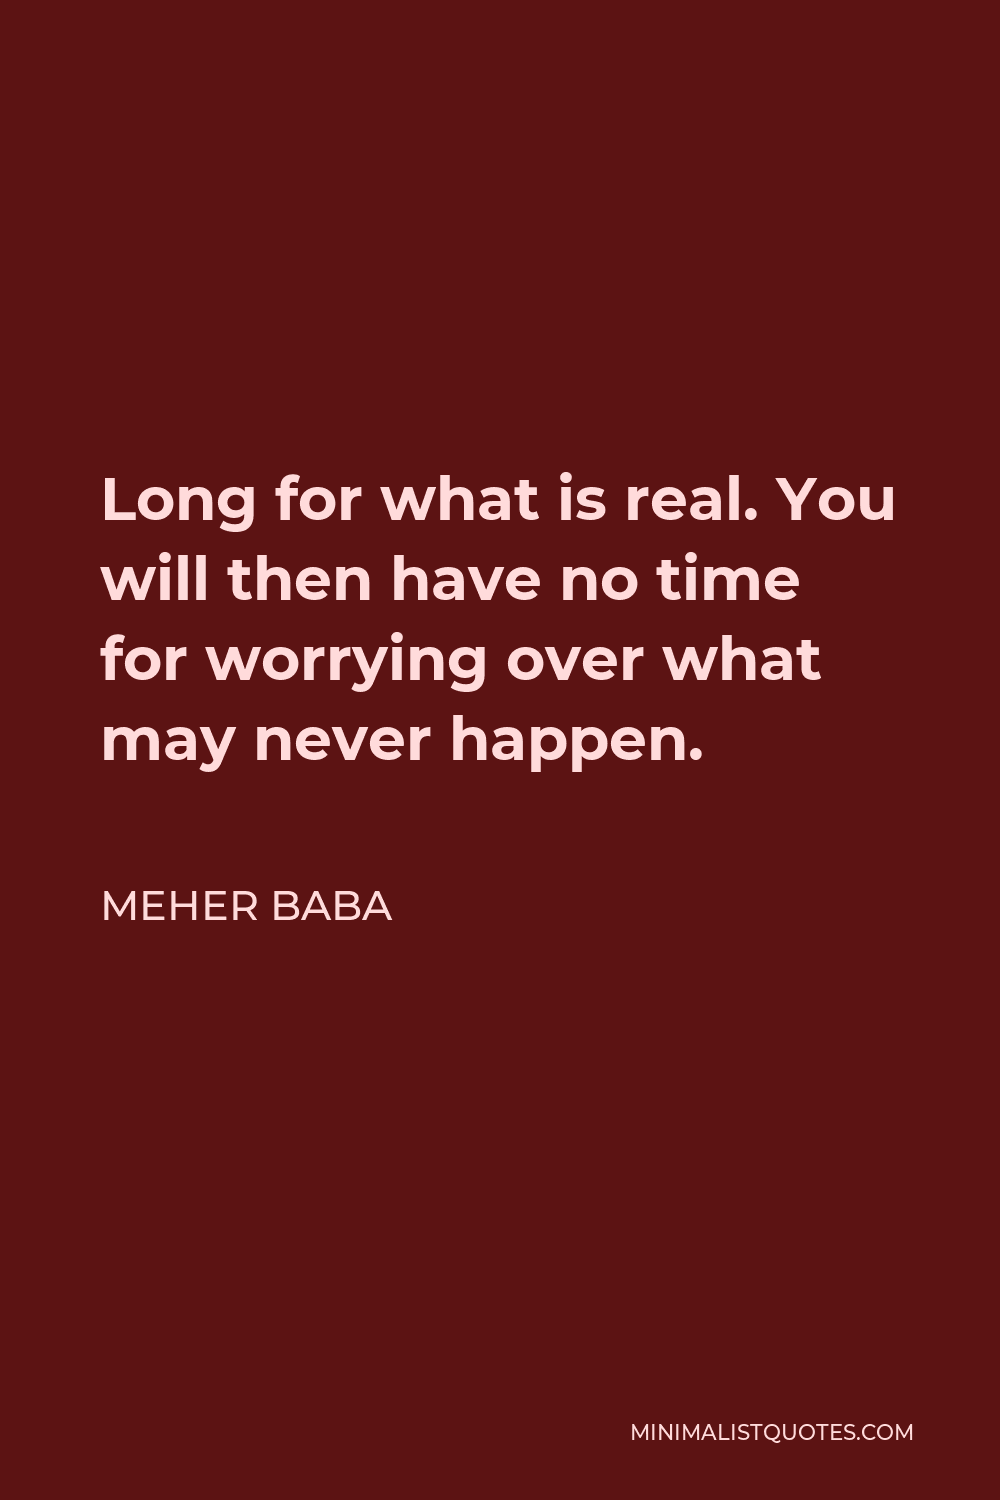 Meher Baba Quote - Long for what is real. You will then have no time for worrying over what may never happen.